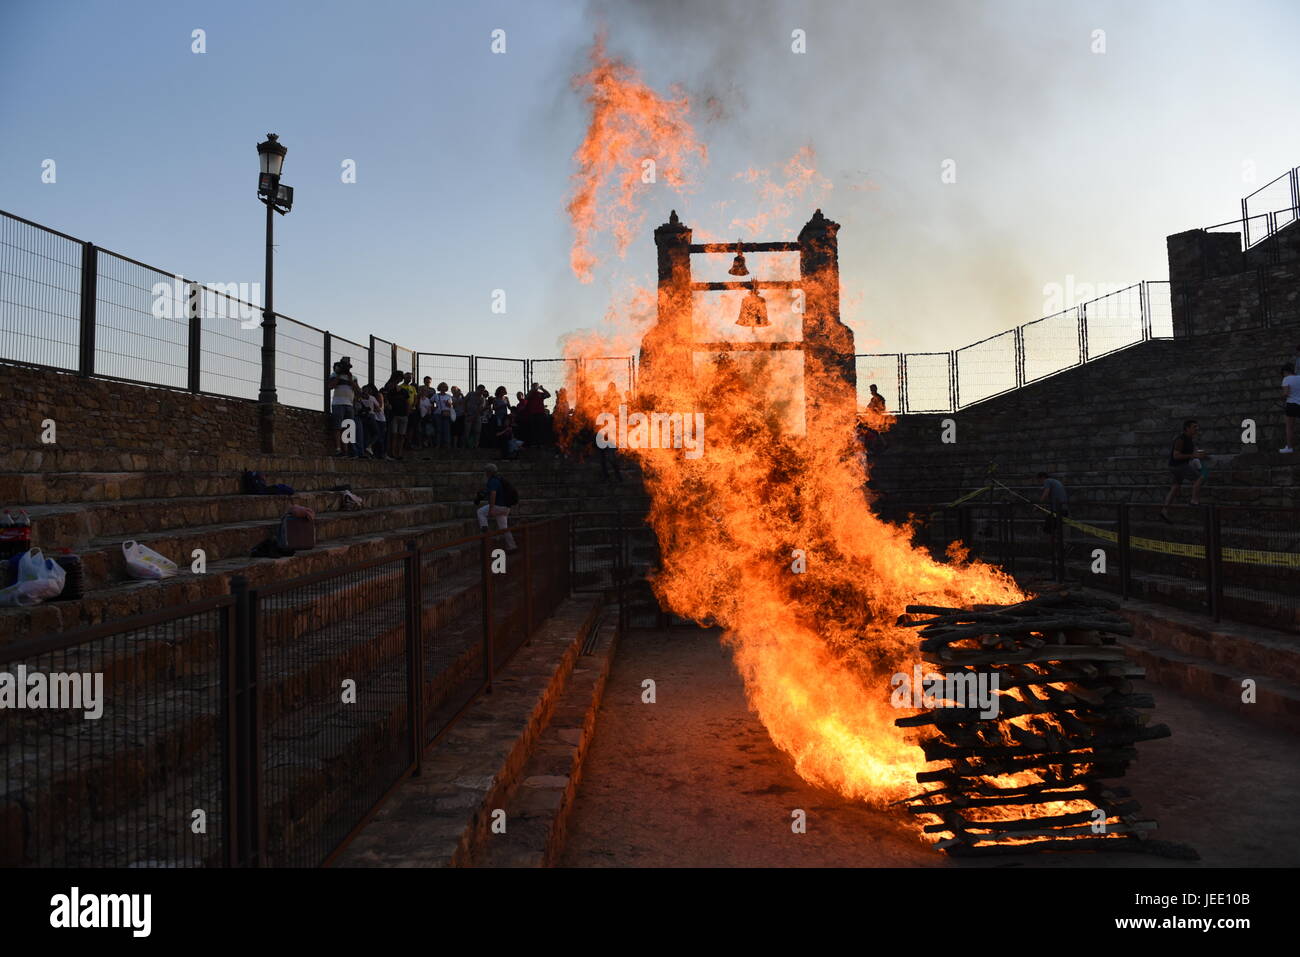 People view a fire before walking on the burning embers during the night of San Juan in San Pedro Manrique, northern Spain, (Photo byJorge Sanz/Pacific Press) Stock Photo